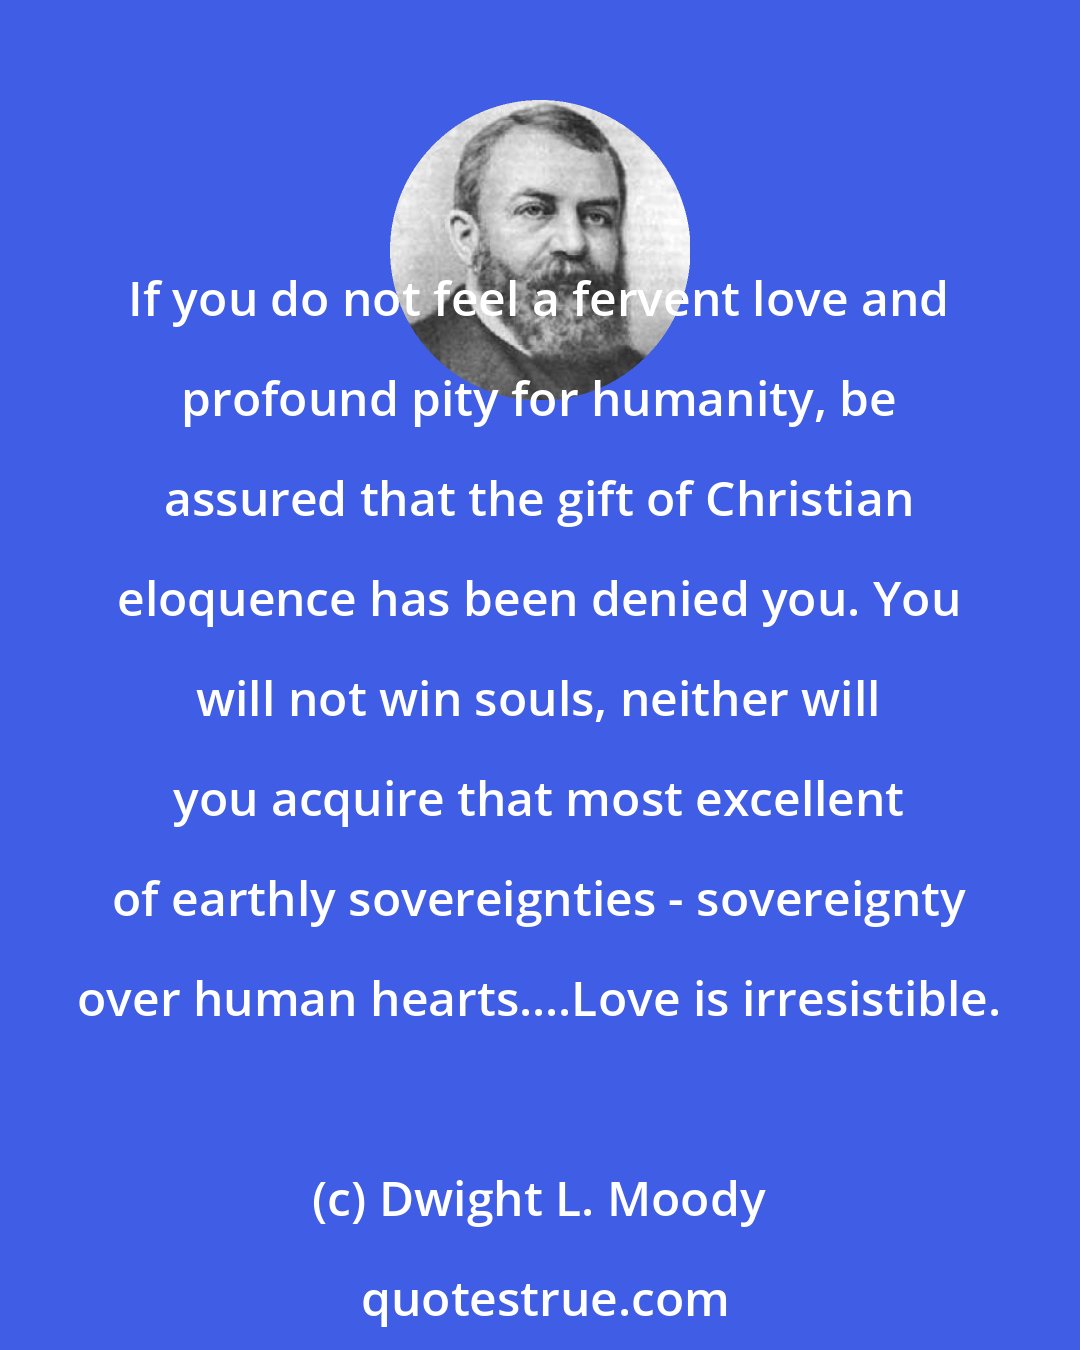 Dwight L. Moody: If you do not feel a fervent love and profound pity for humanity, be assured that the gift of Christian eloquence has been denied you. You will not win souls, neither will you acquire that most excellent of earthly sovereignties - sovereignty over human hearts....Love is irresistible.